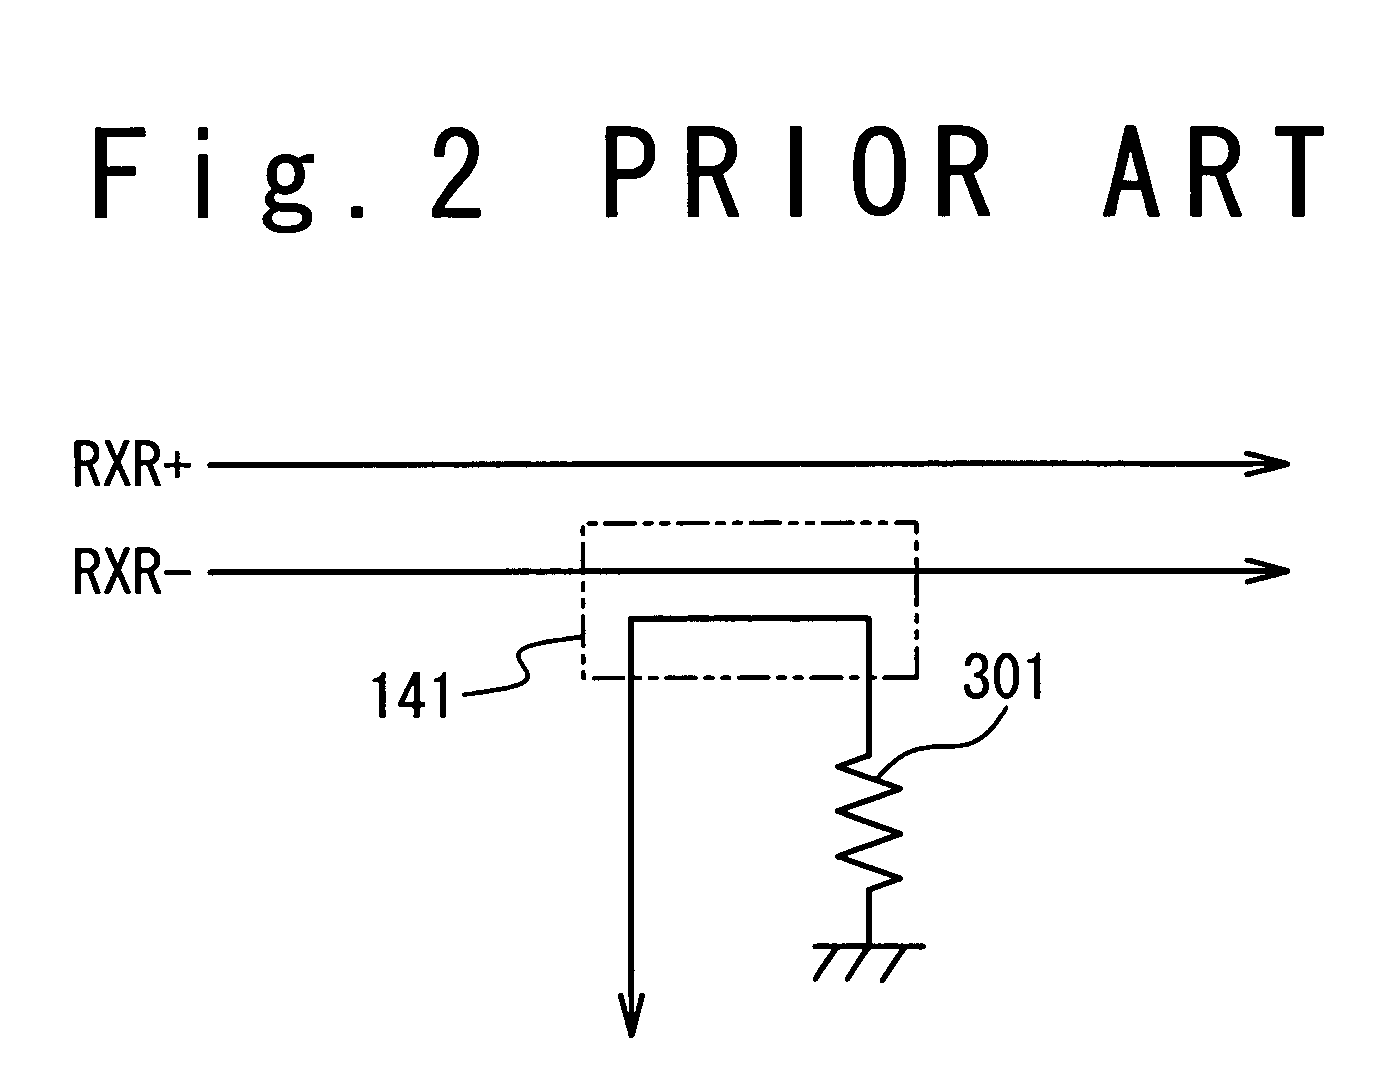 Data transfer apparatus for low voltage differential signaling